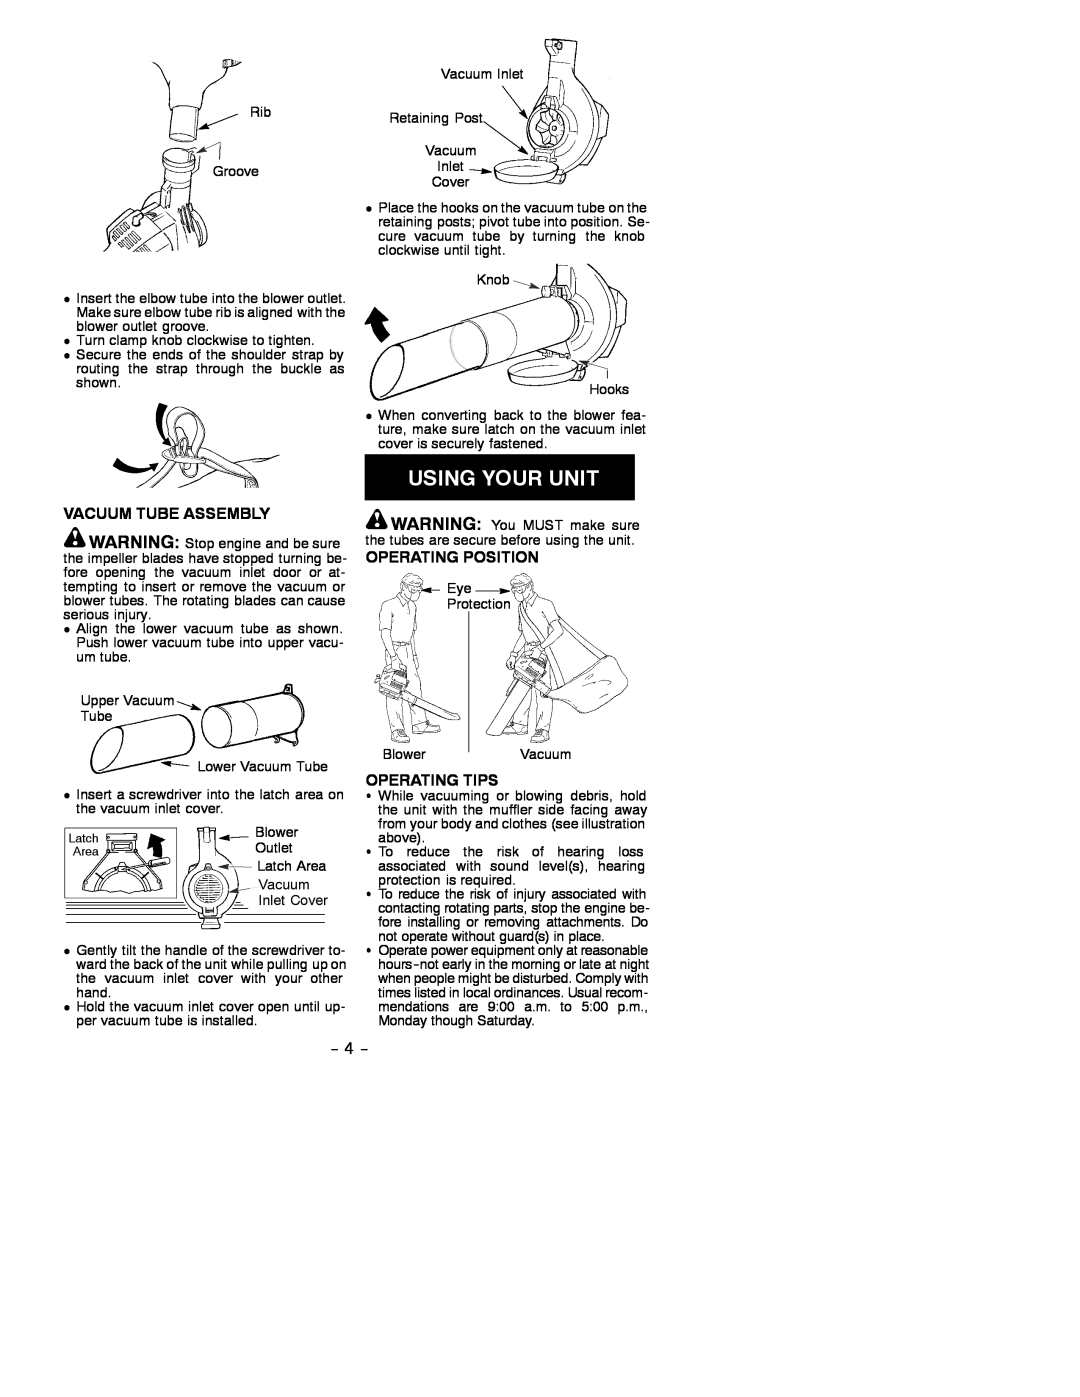 Weed Eater 530086692 instruction manual Vacuum Tube Assembly, Operating Position, Operating Tips 